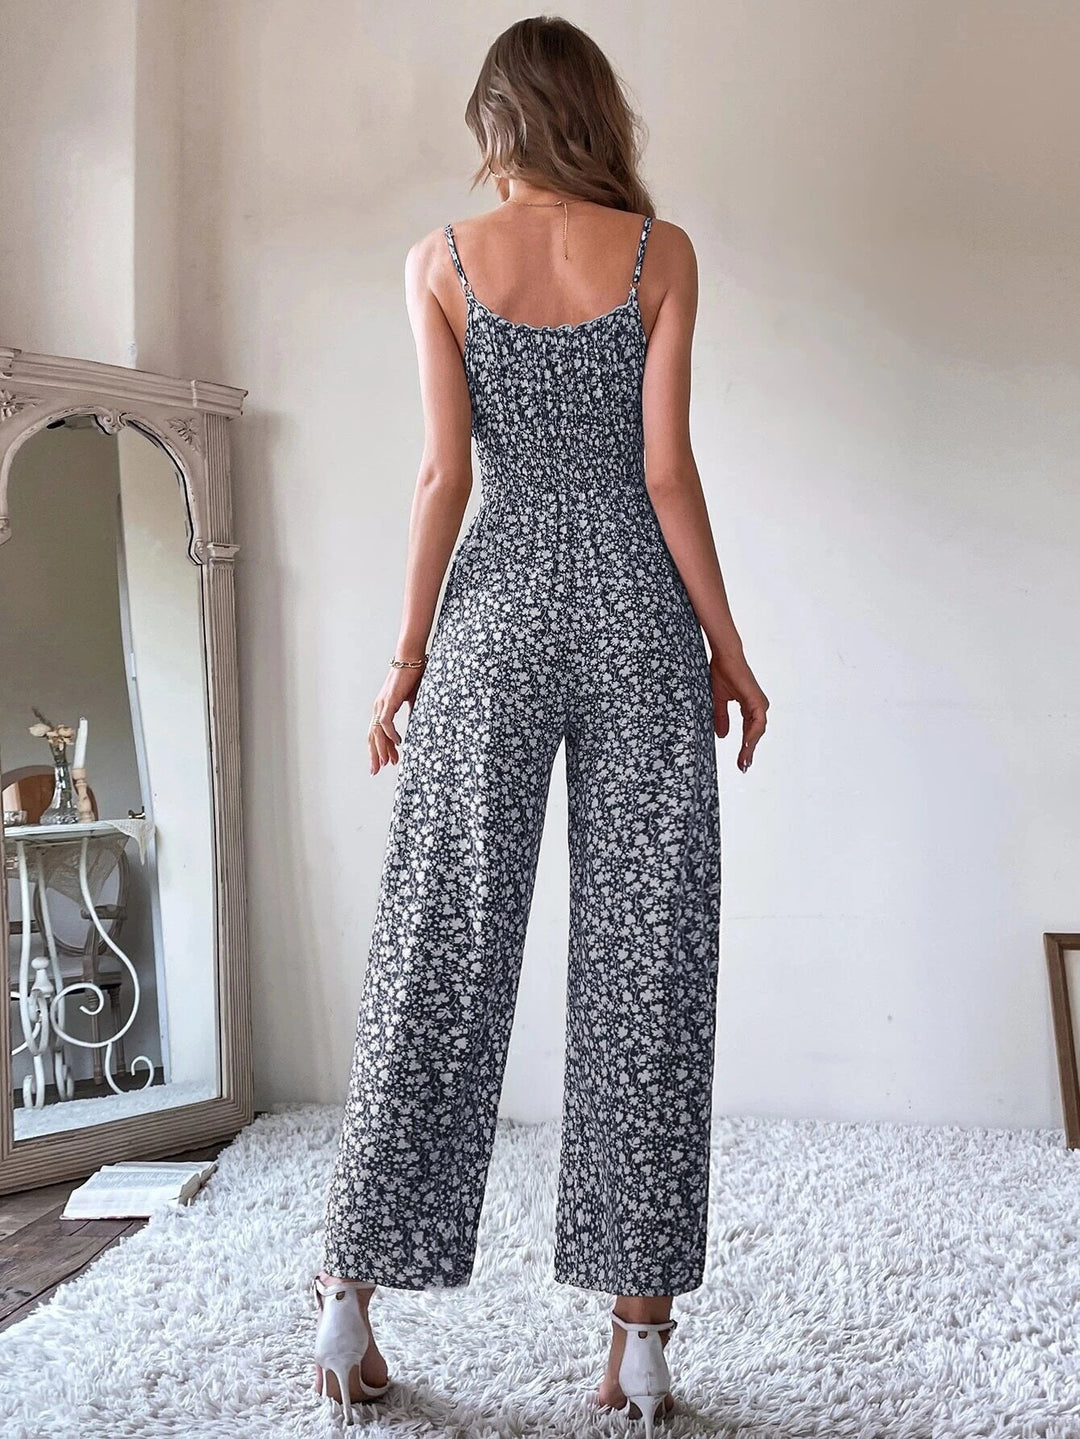 Ditsy Floral Tie Front Shirred Waist Cami Jumpsuit